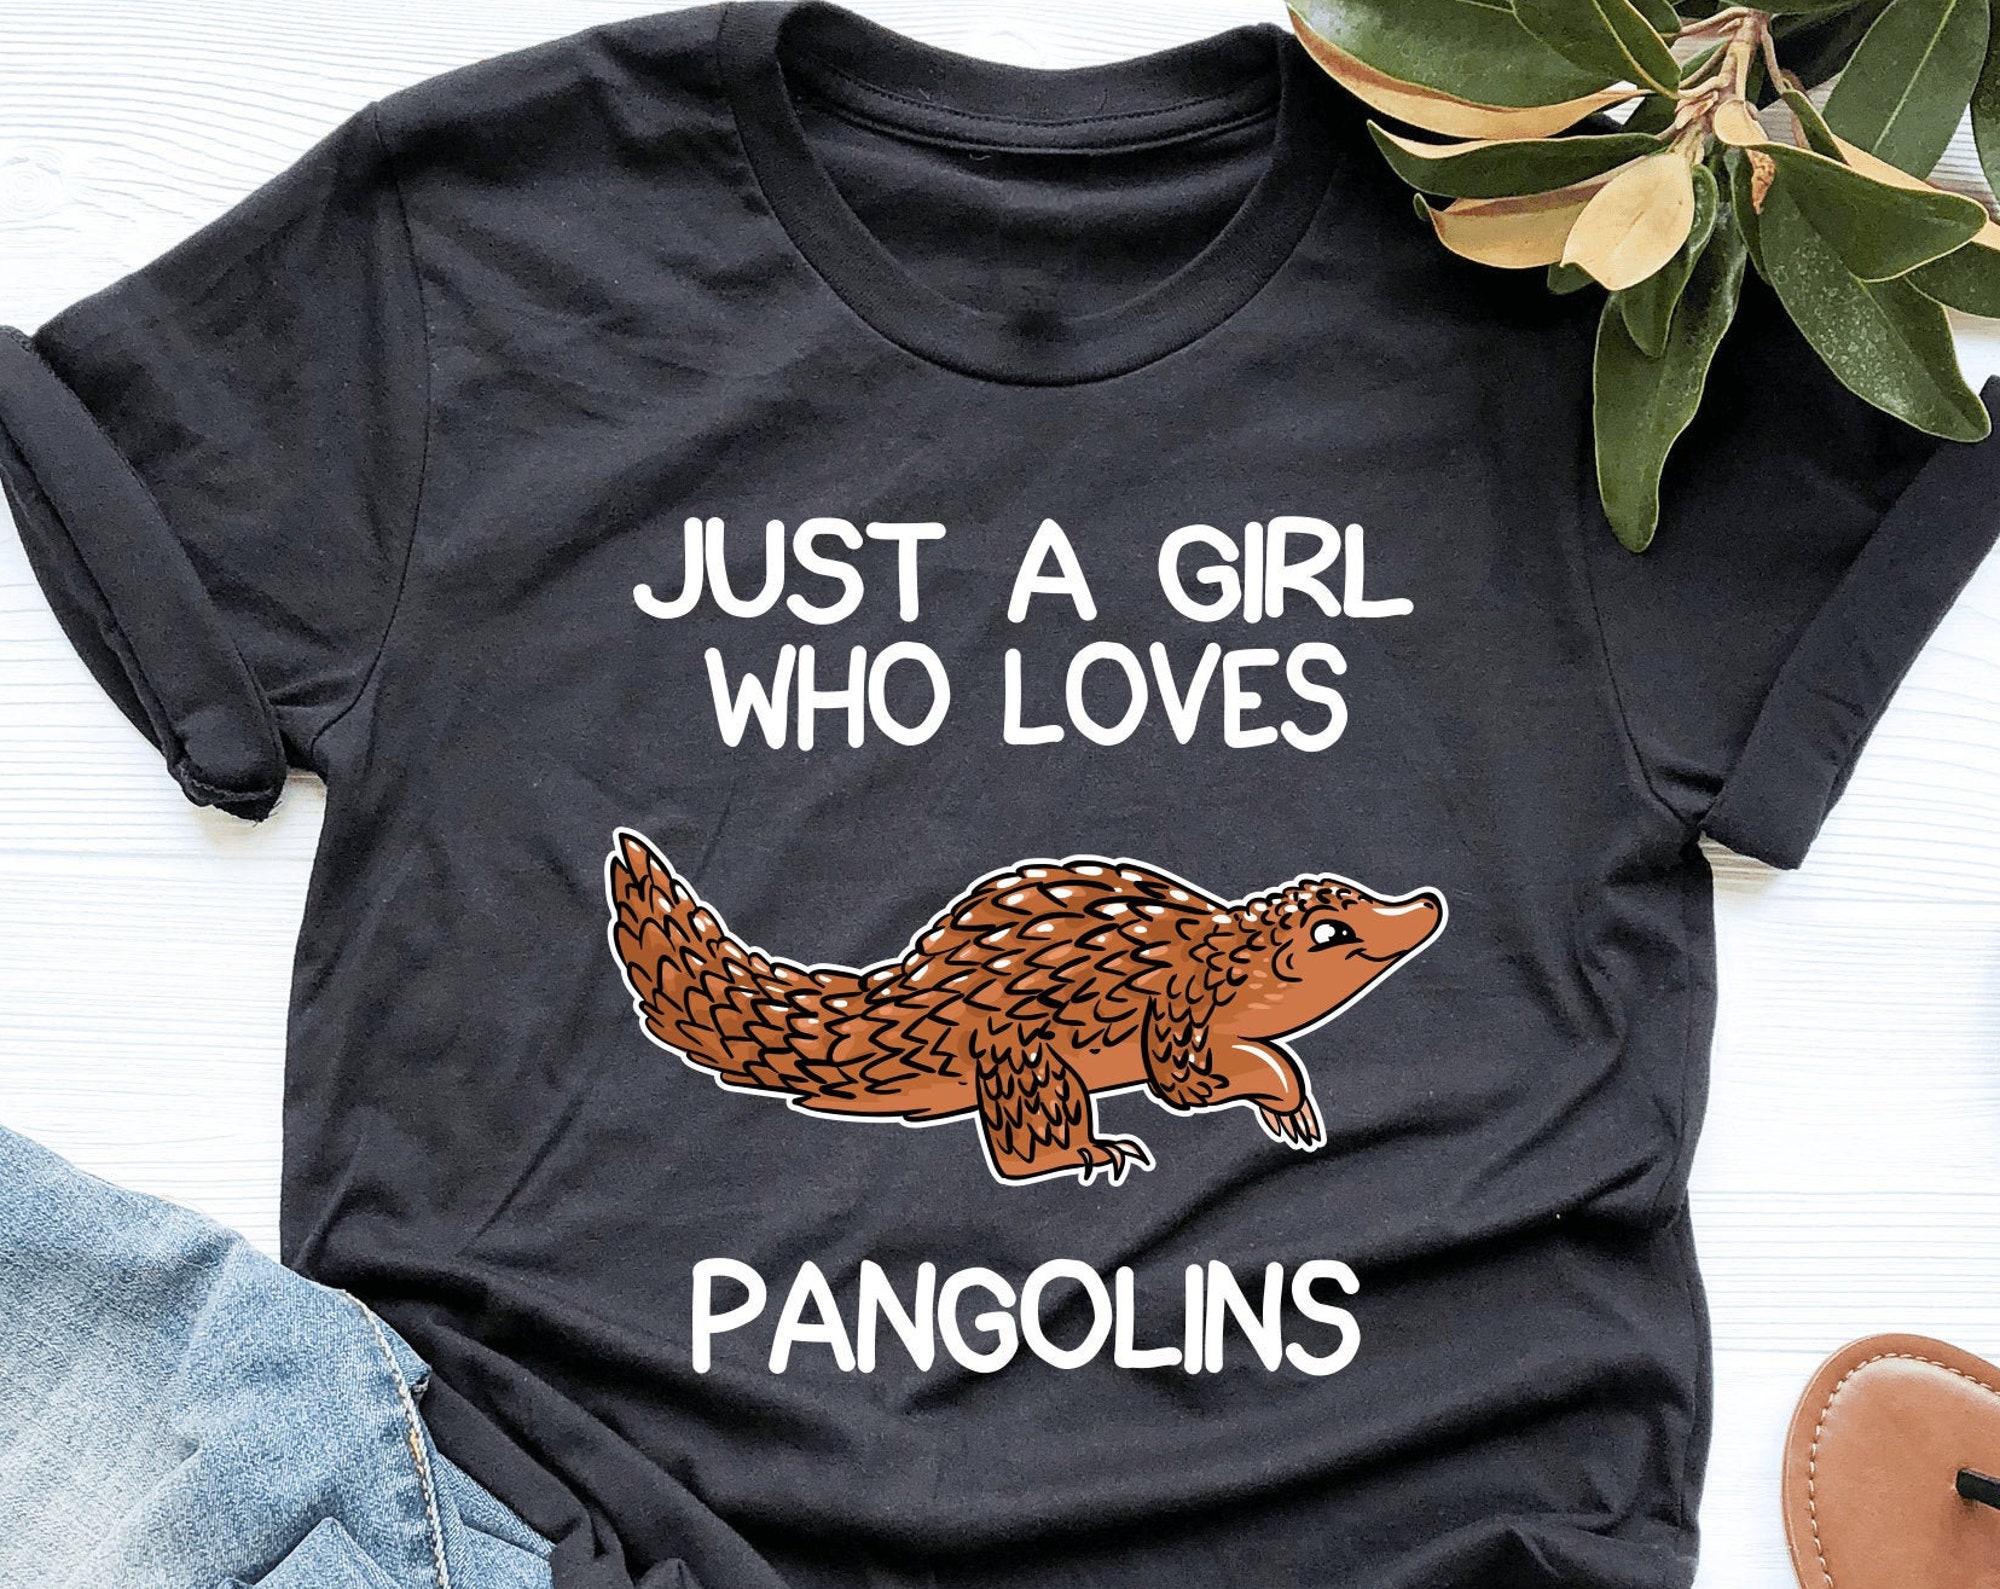 Discover Just A Girl Who Loves Pangolins Shirt, Pangolins Shirt, Pangolin Lover Gift, Womens Shirt